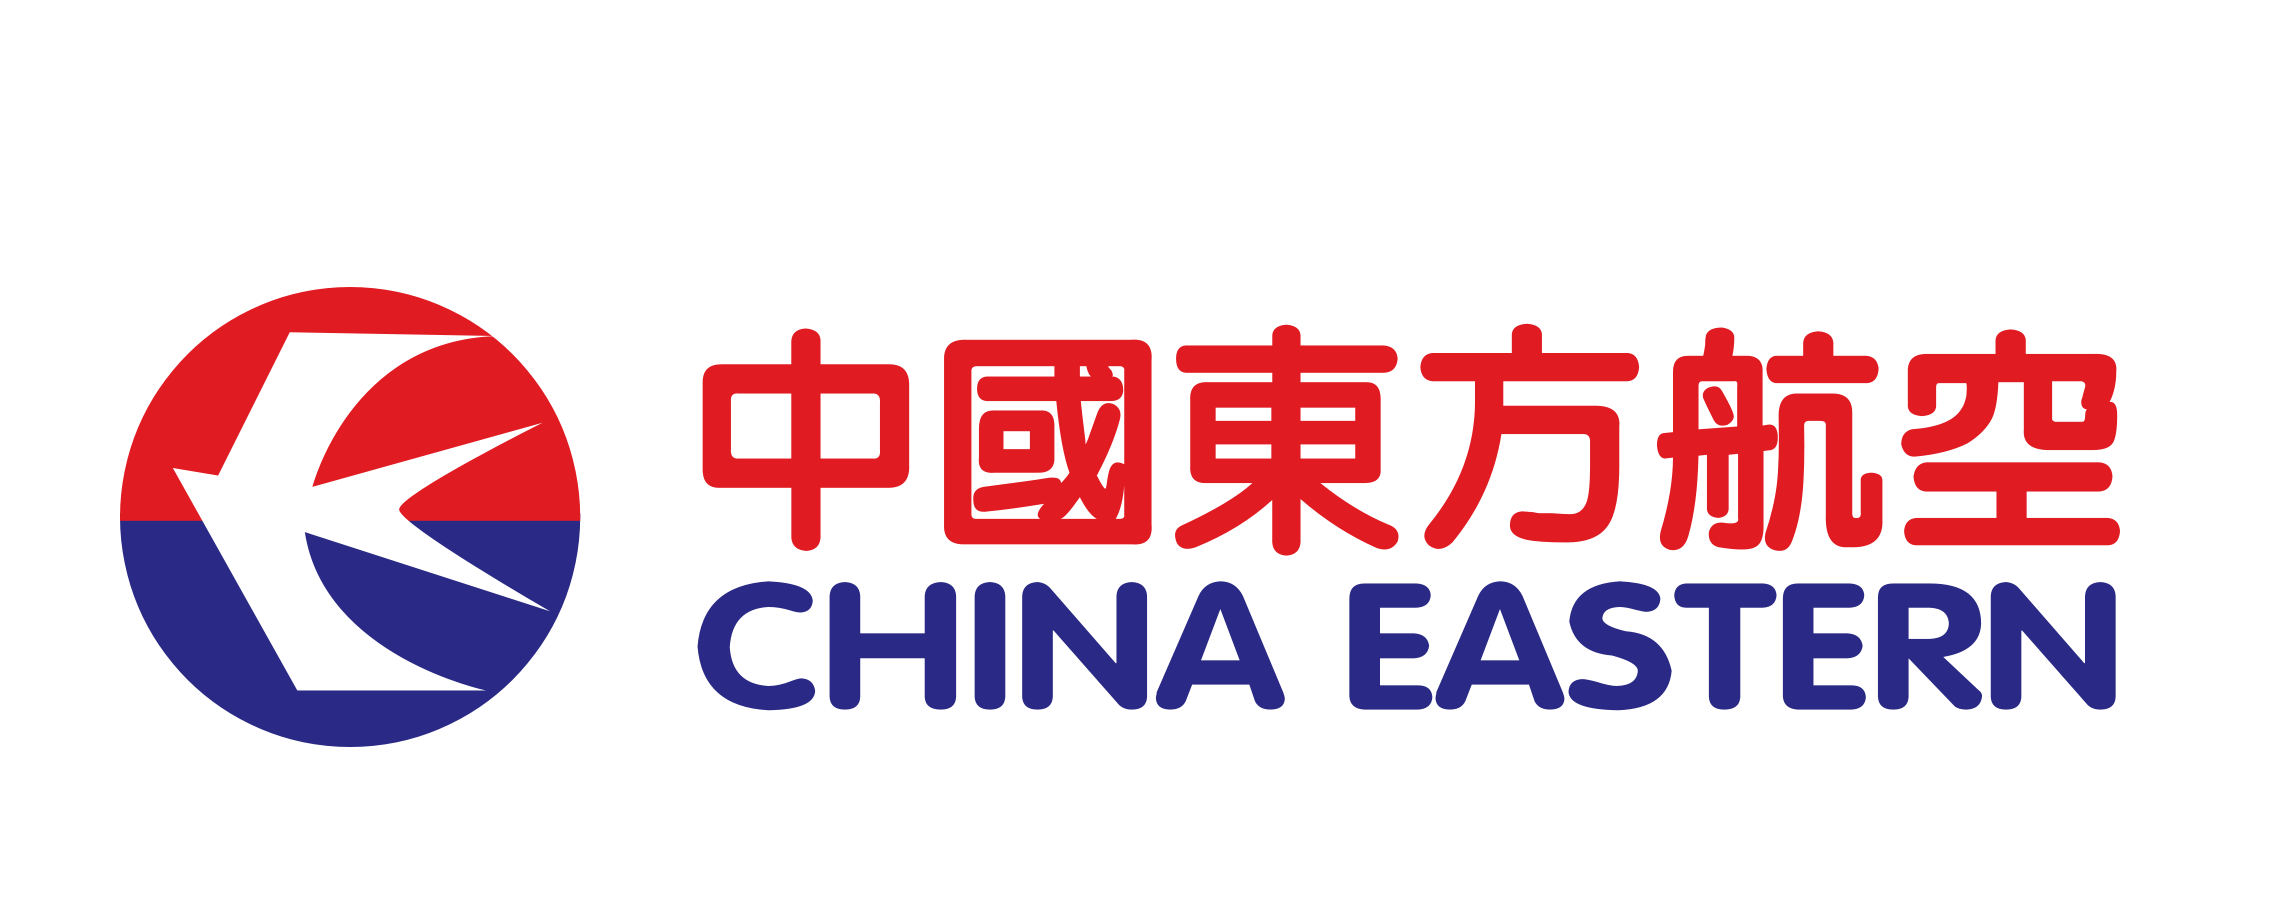 China Eastern Airlines - 9470